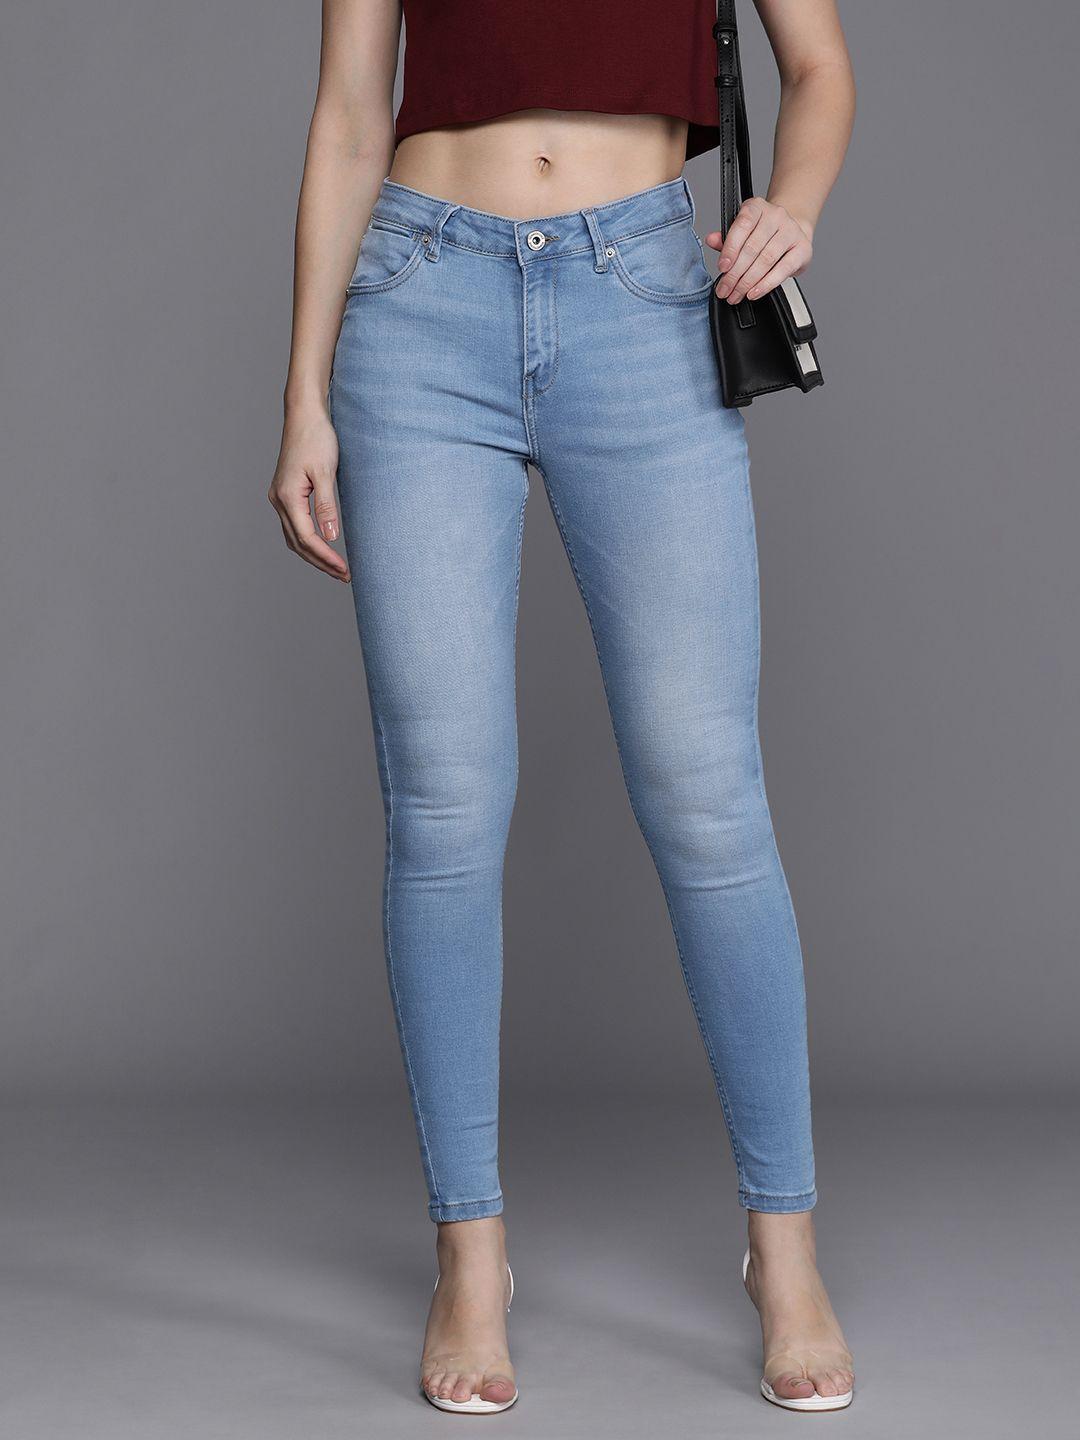 kenneth-cole-women-skinny-fit-light-fade-stretchable-jeans